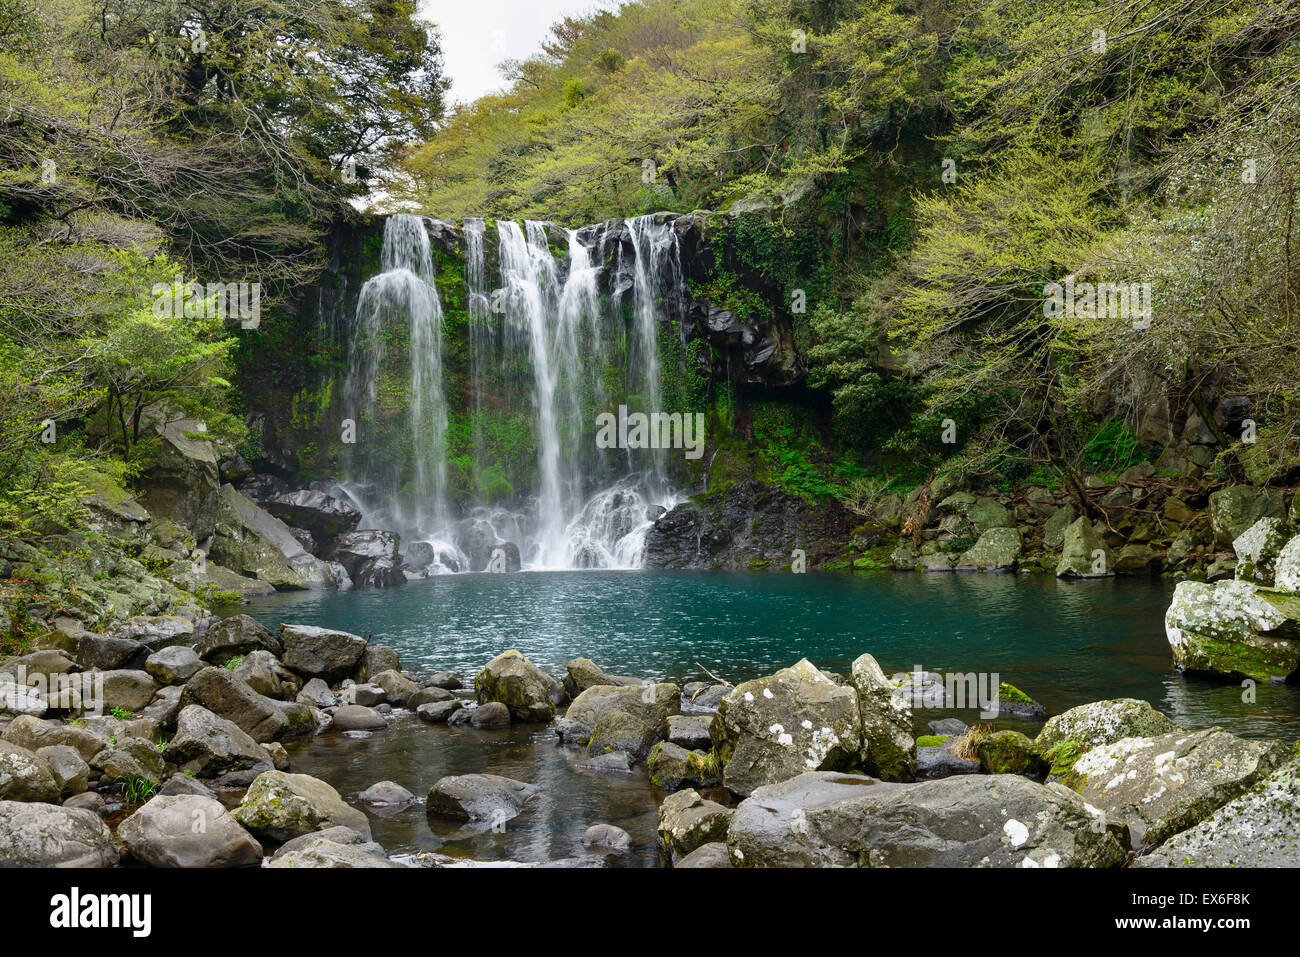 Cheonjeyeon No. 2 cascade. Cheonjeyoen falls (means the pond of God) consists of 3 falls. A variety of plant life, inclued Psilo Stock Photo